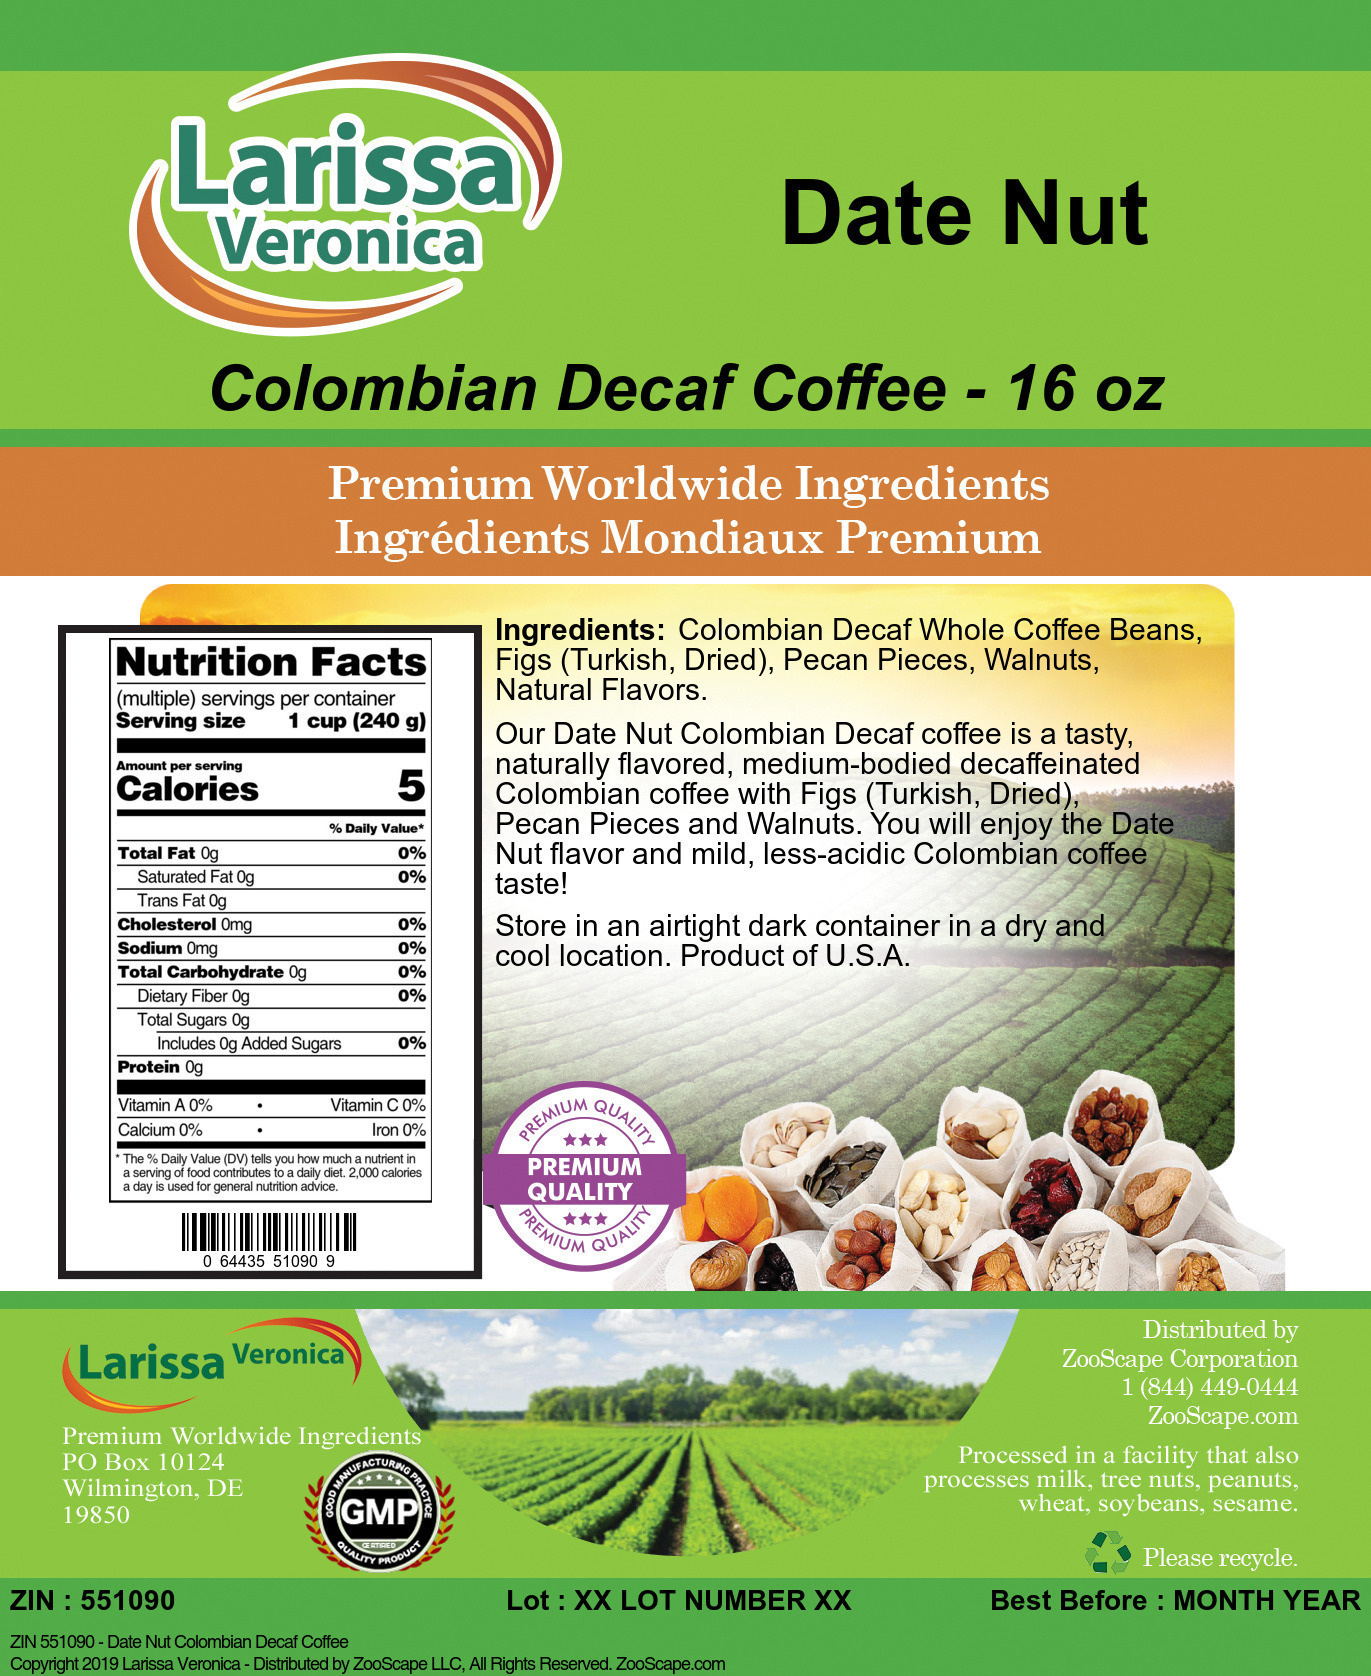 Date Nut Colombian Decaf Coffee - Label